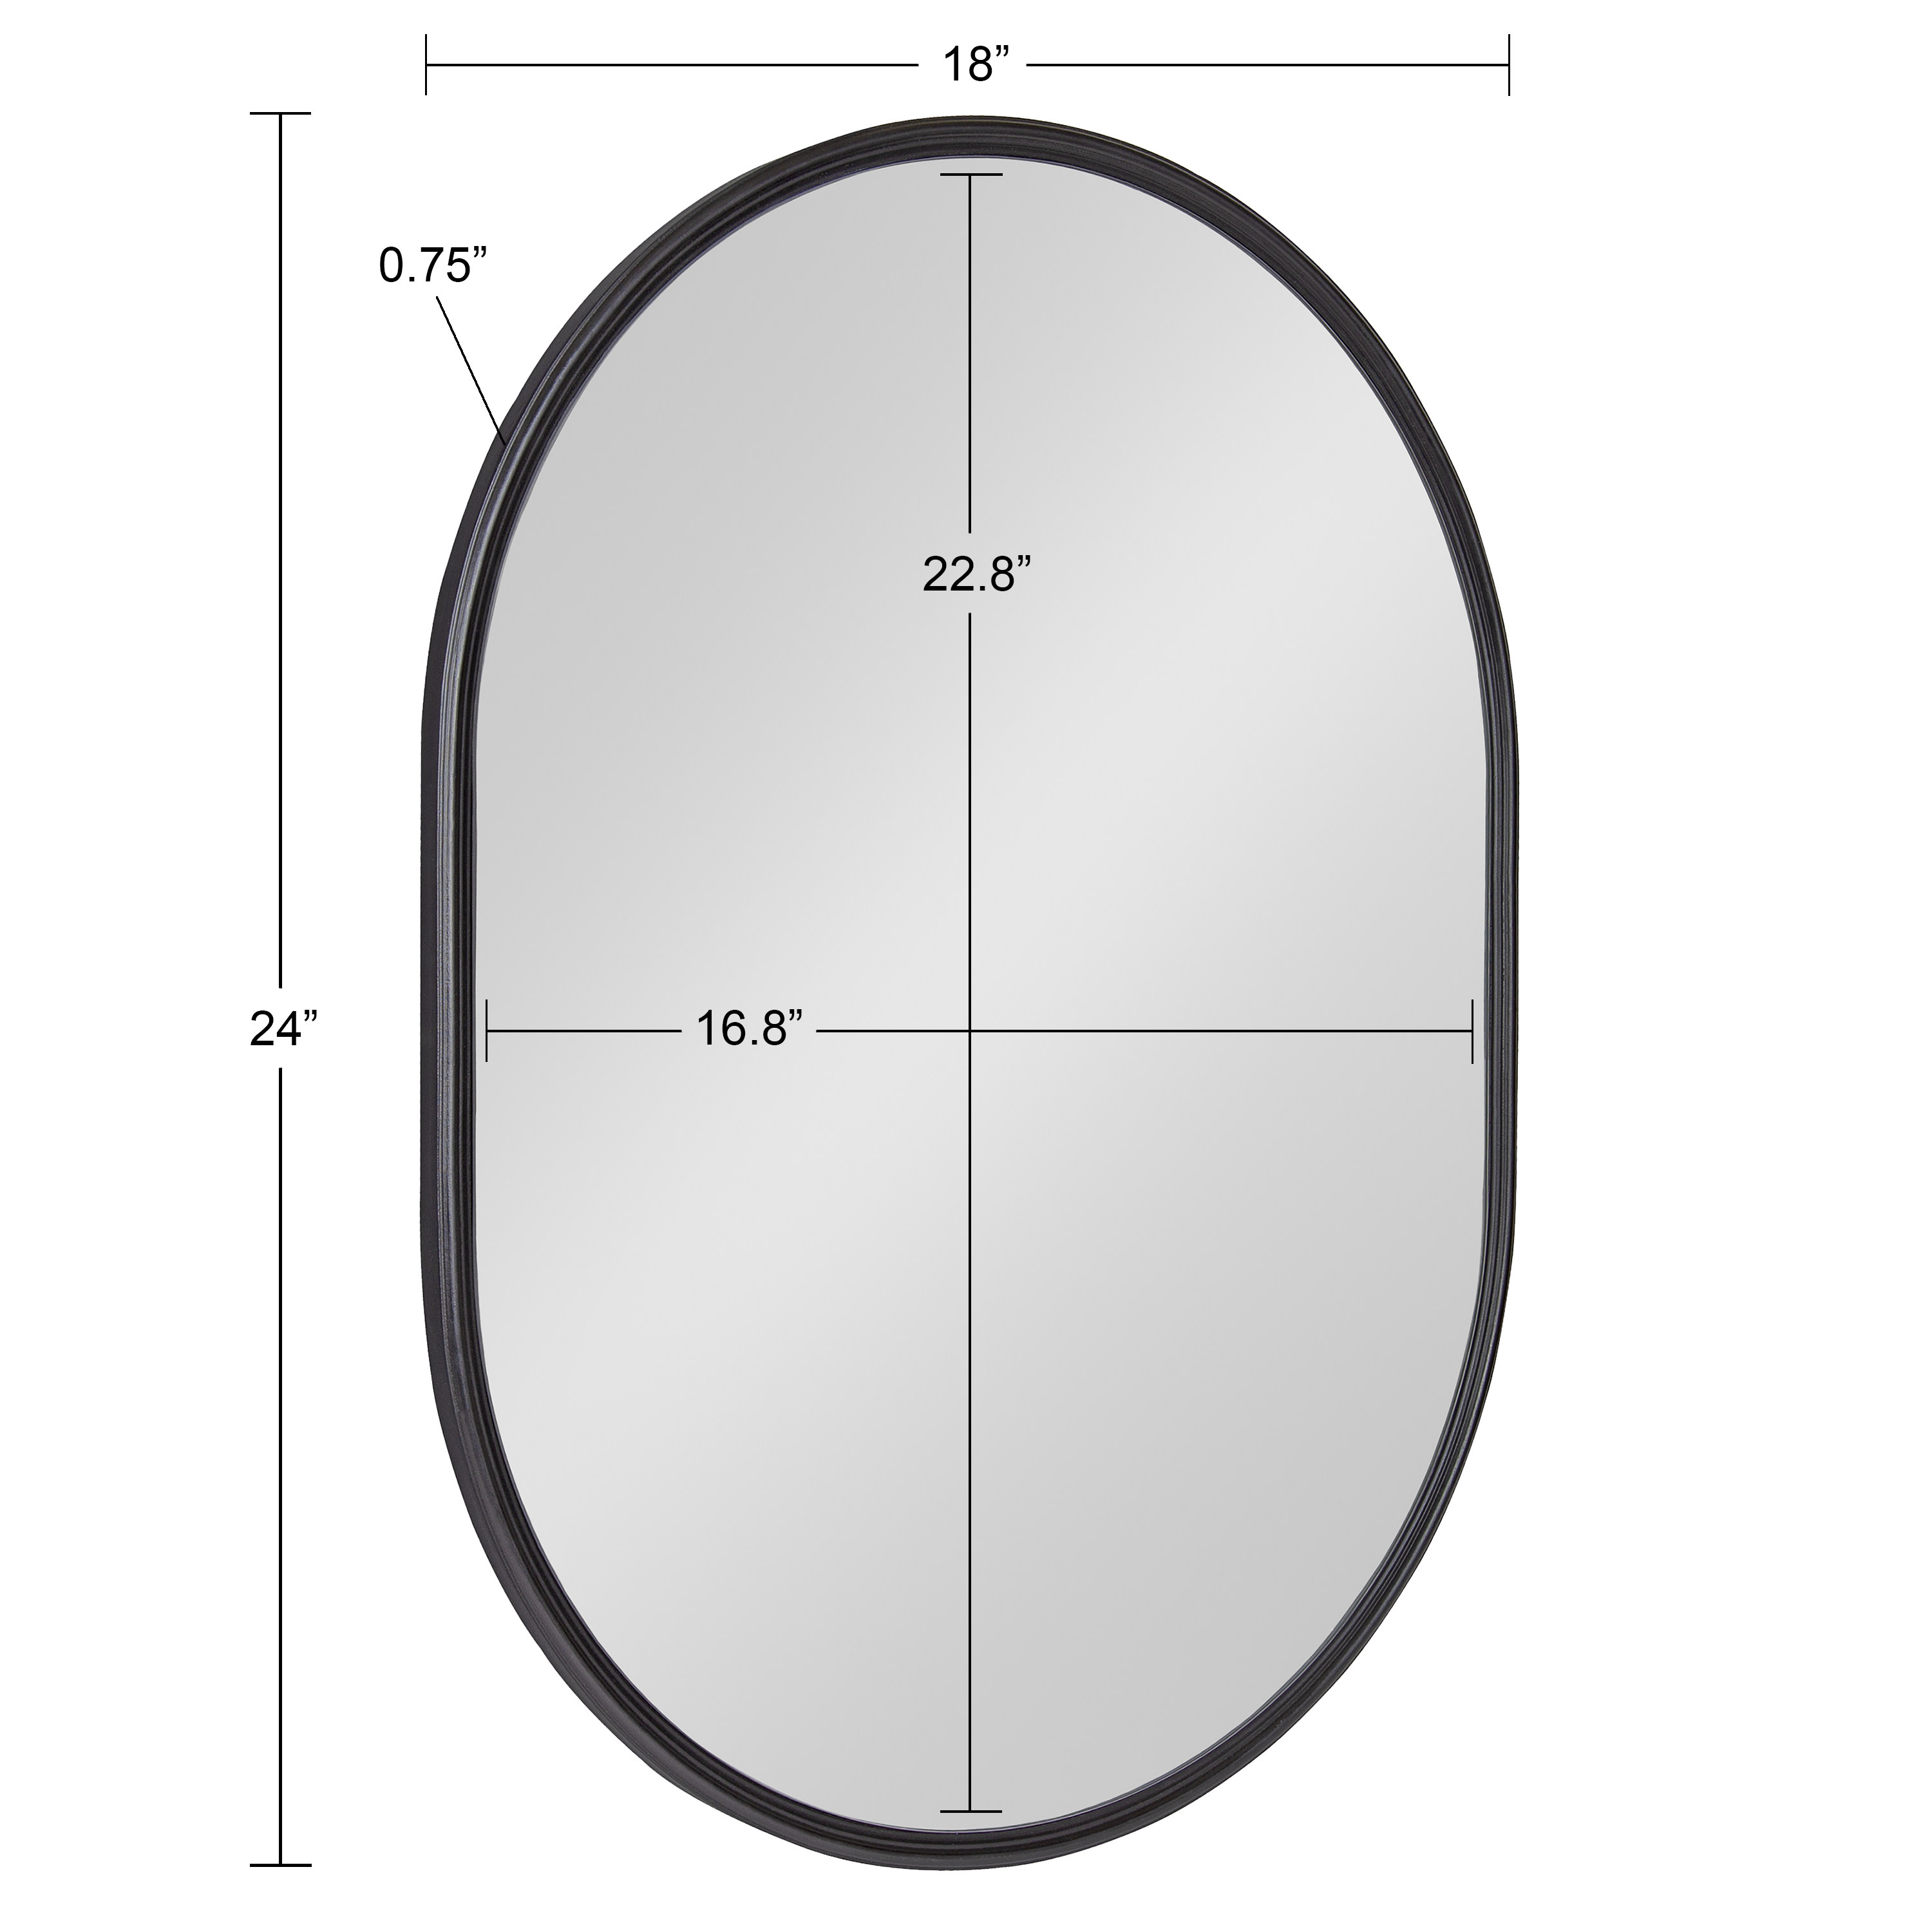 Kate and Laurel Caskill Modern Oval Mirror, 18